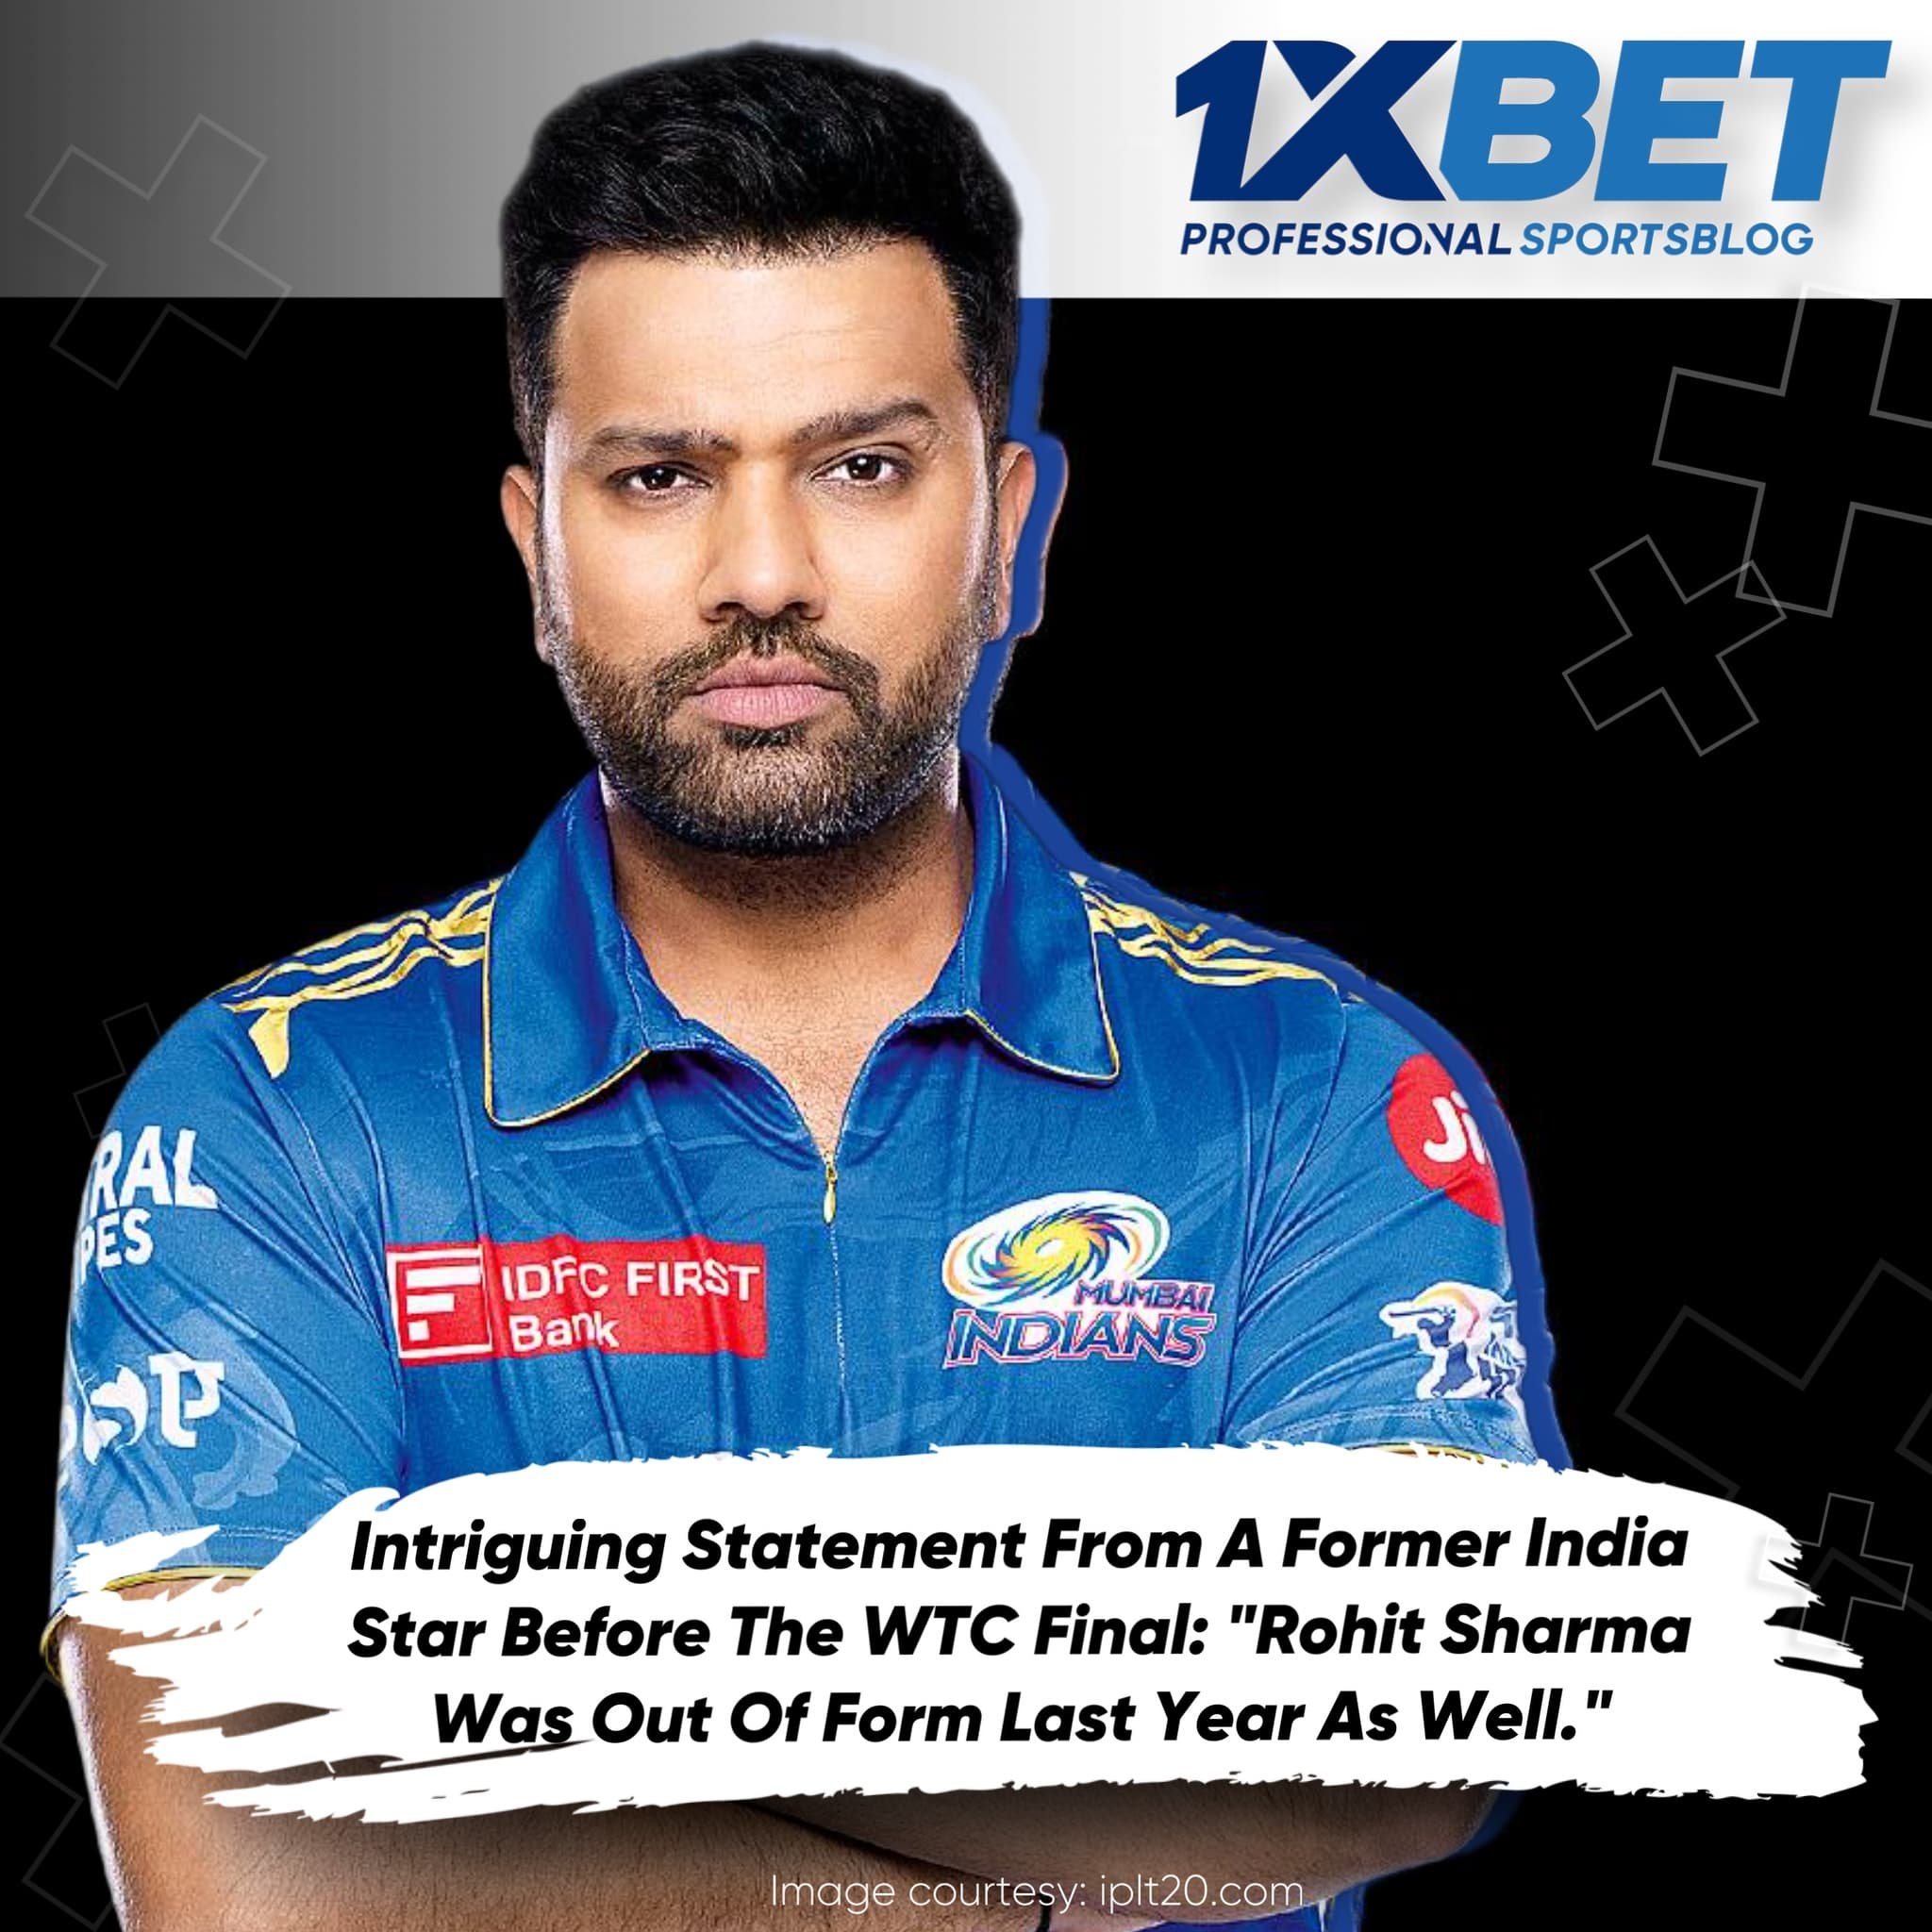 Intriguing Statement From A Former India Star Before The WTC Final: "Rohit Sharma Was Out Of Form Last Year As Well."